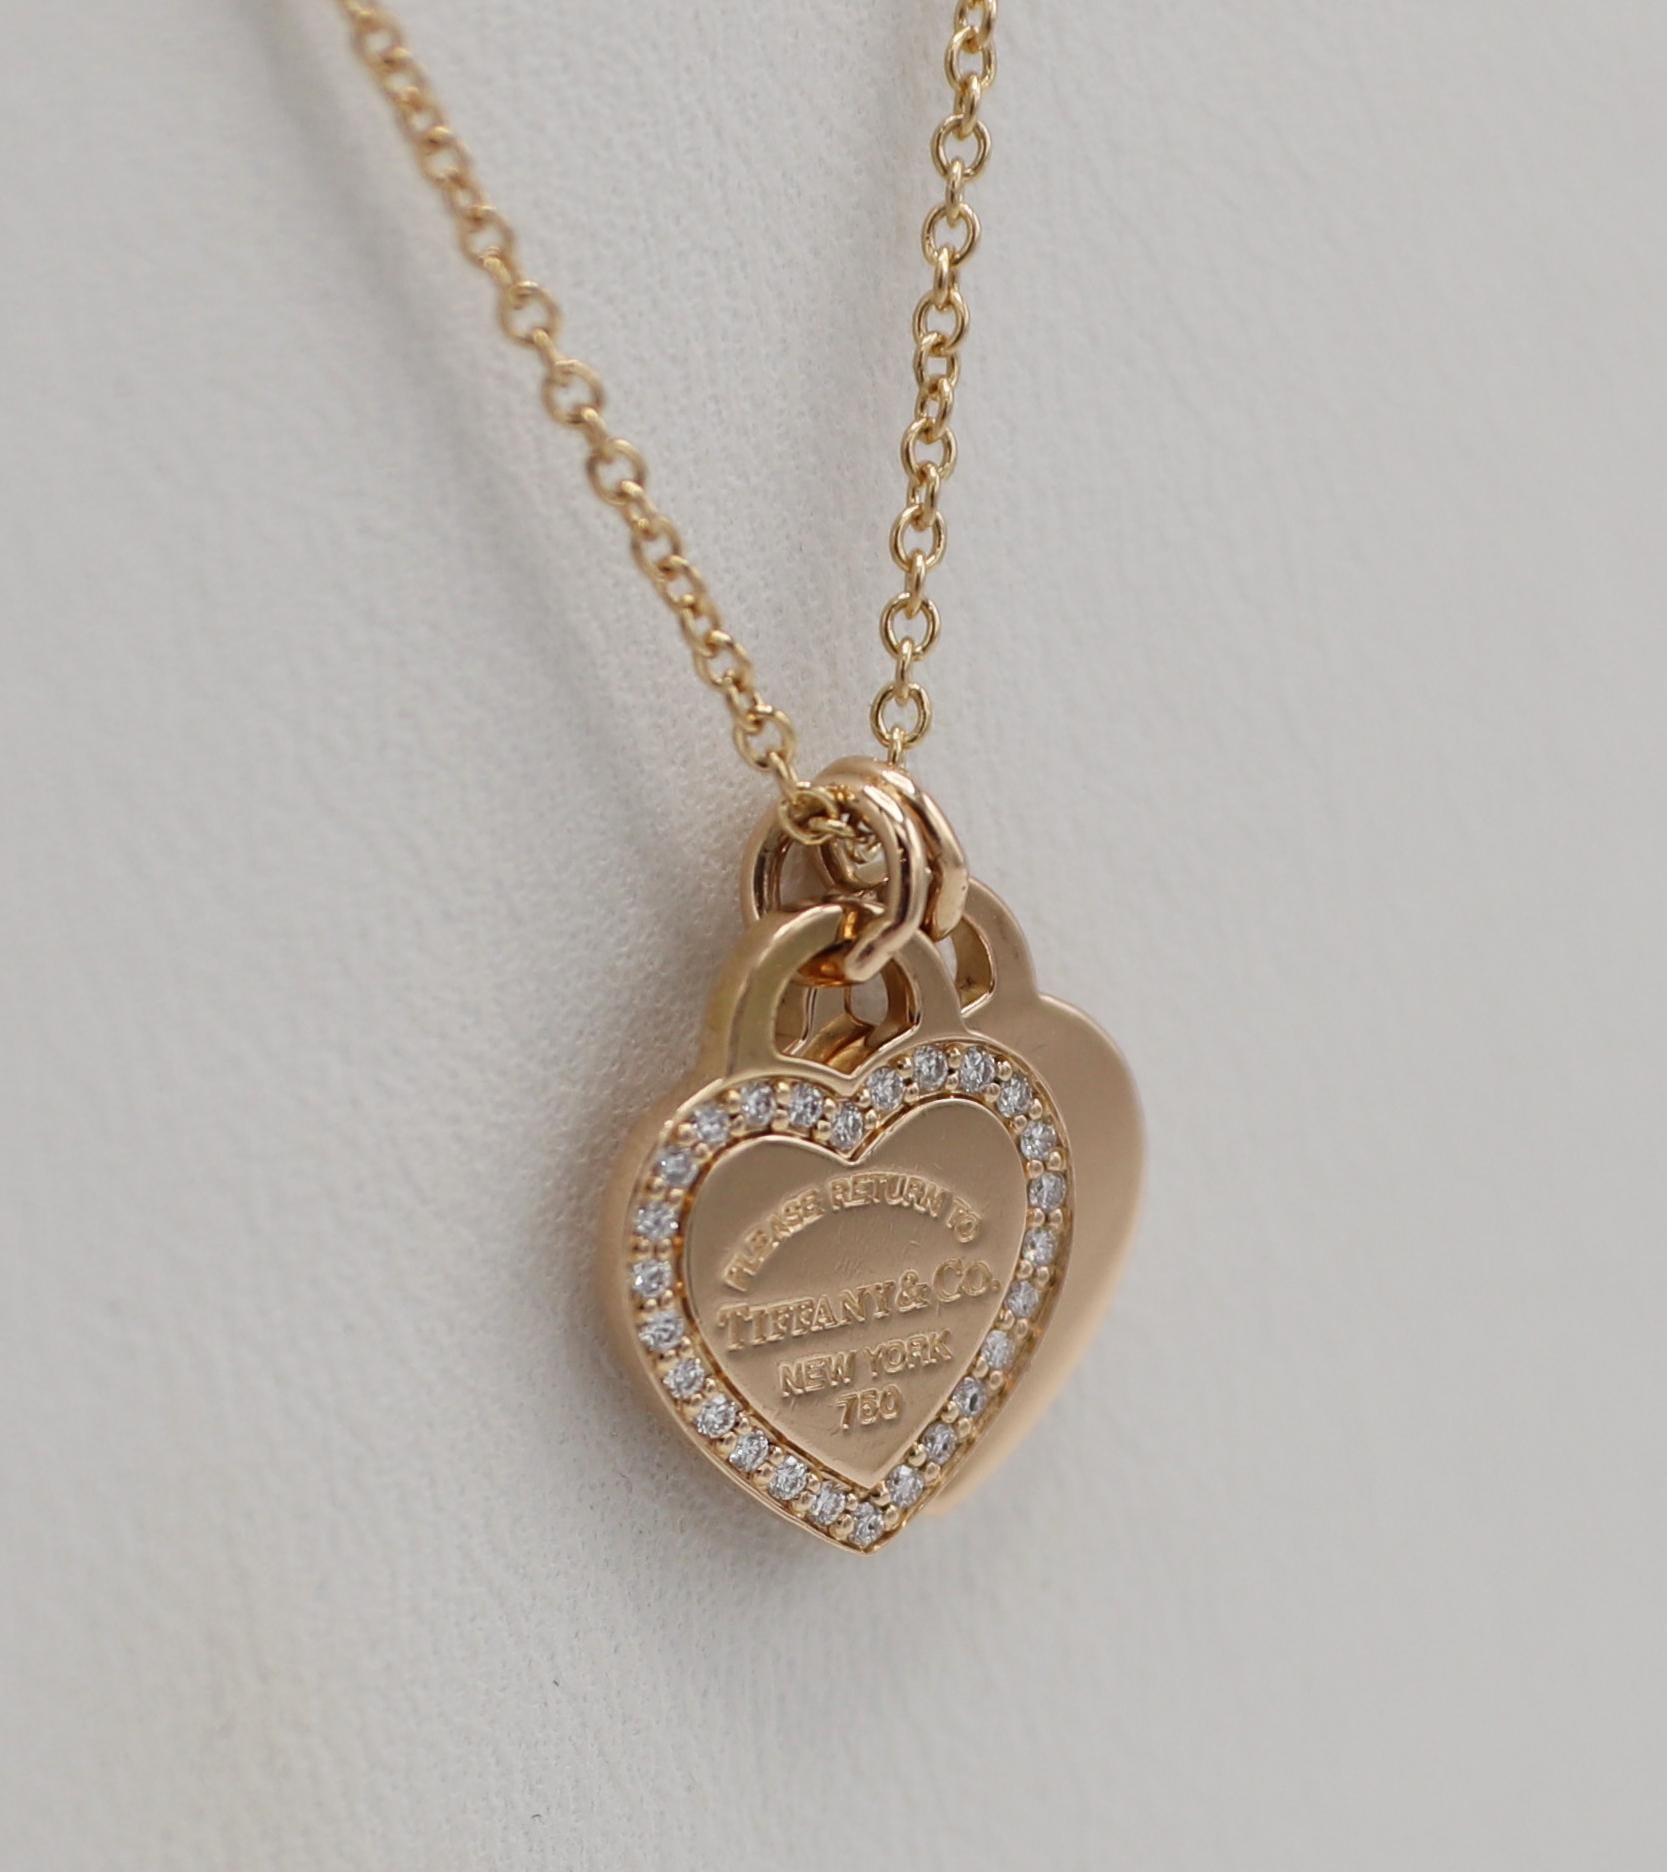 Tiffany & Co. Mini Double Heart Tag Pendant Rose Gold & Diamonds 
Metal: 18k rose gold
Weight: 4.18 grams
Diamonds: Approx. .15 CTW F-G VS round natural diamonds
Chan: 16 inches
Hearts: 10 x 12mm
Signed: Please Return to Tiffany & Co. New York 750